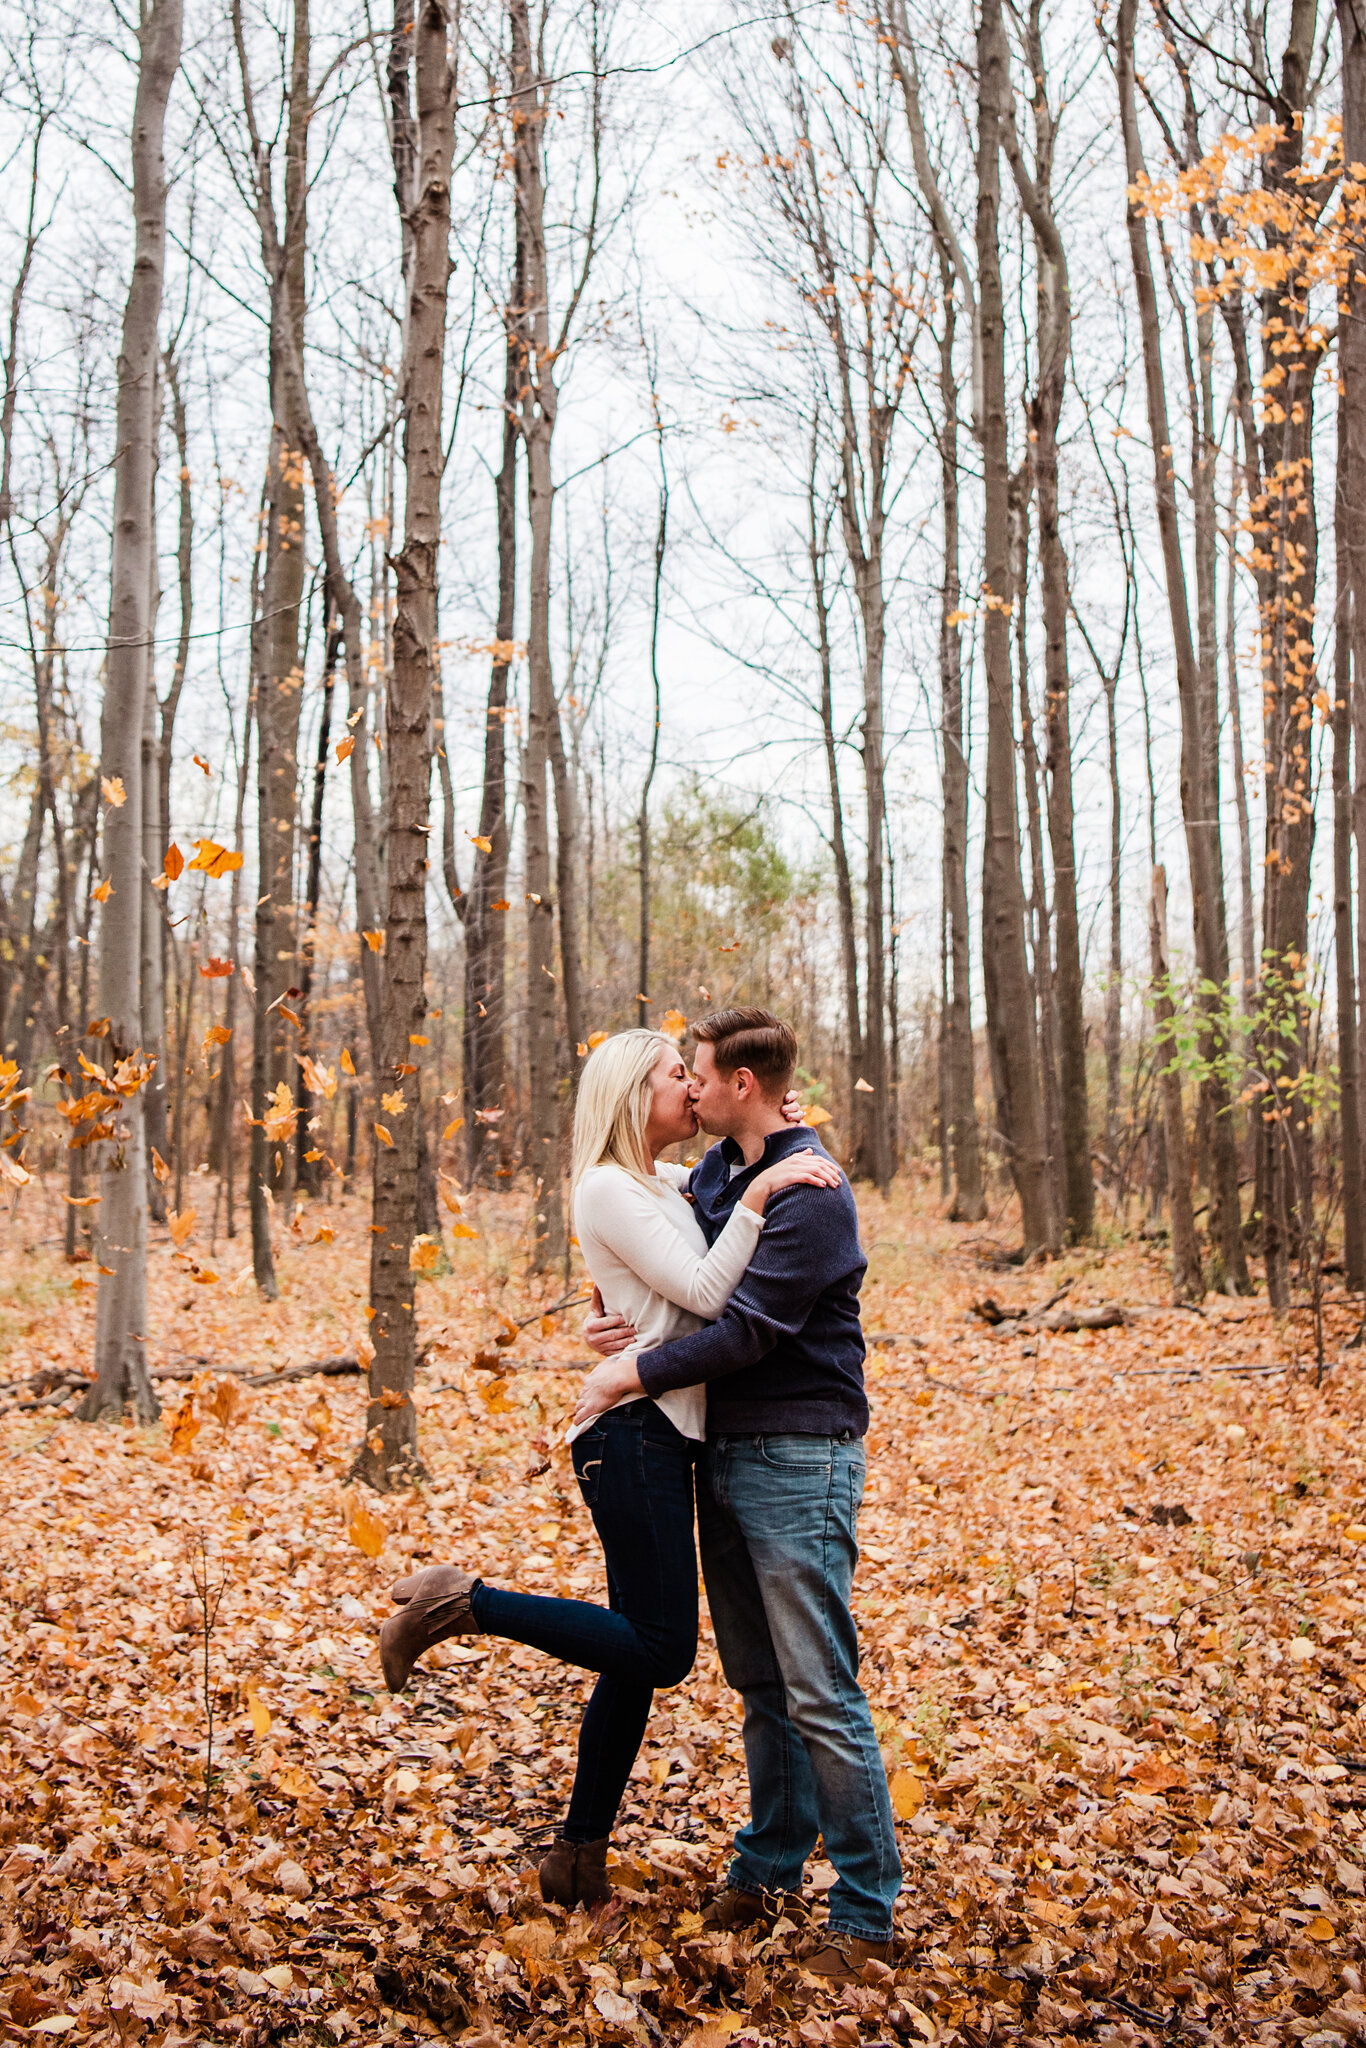 North_Ponds_Park_Rochester_Engagement_Session_JILL_STUDIO_Rochester_NY_Photographer_3603.jpg